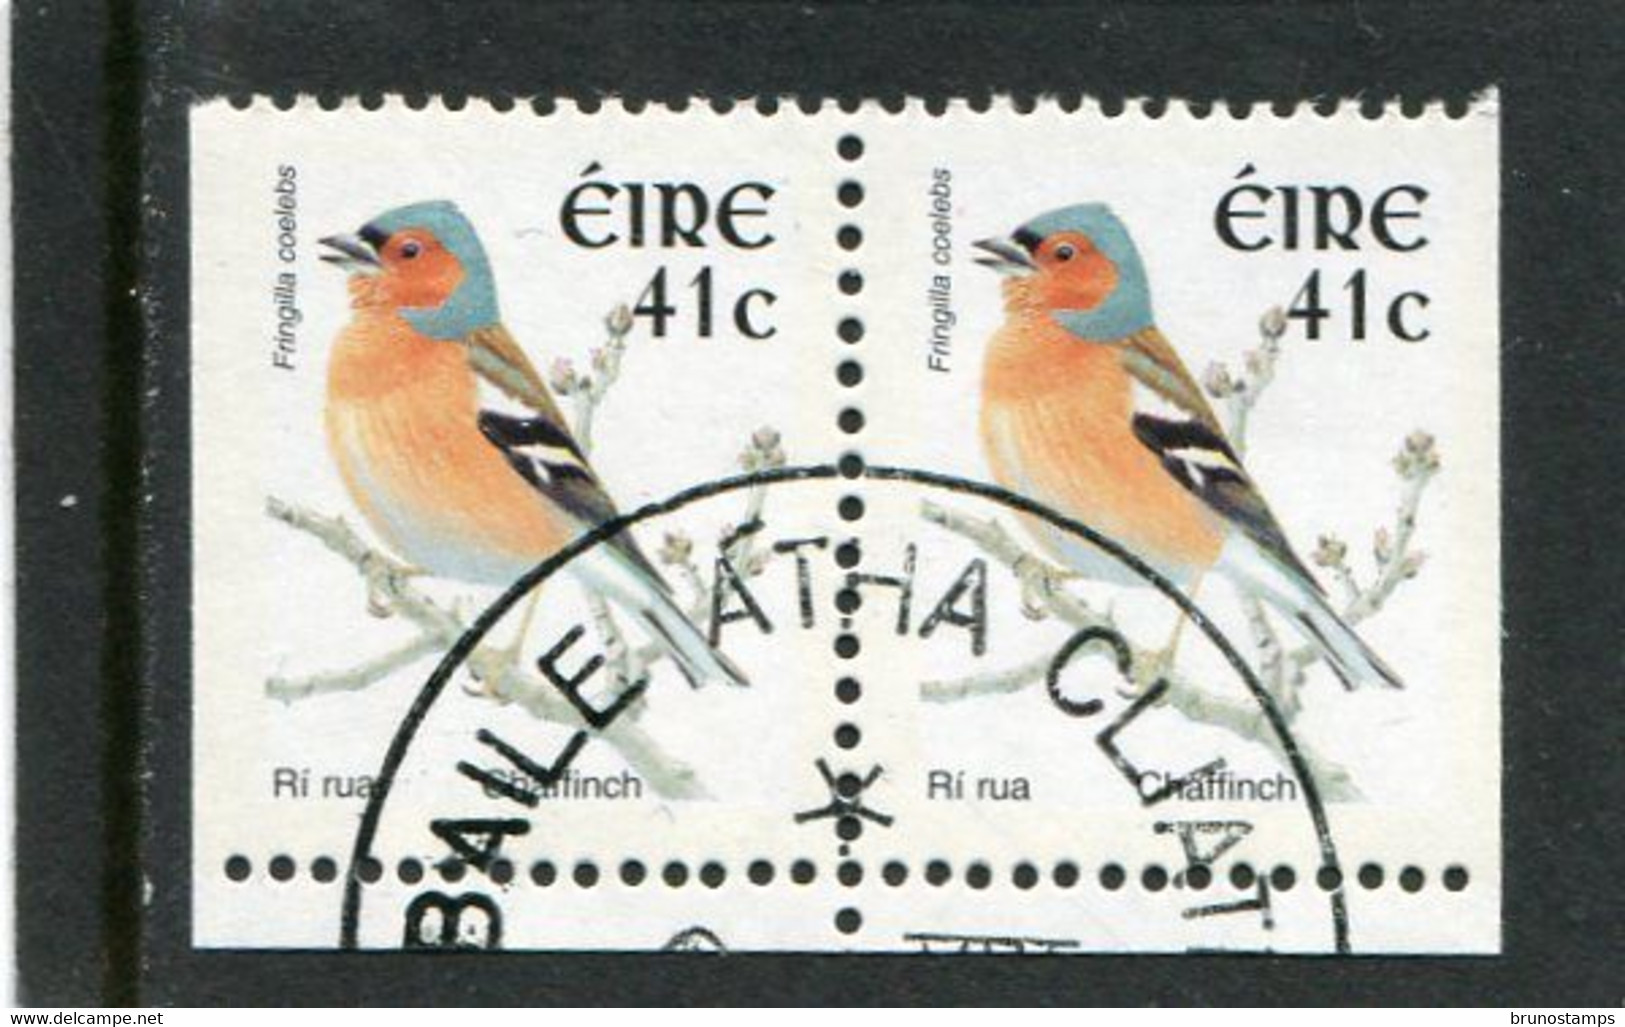 IRELAND/EIRE - 2002  41c  BIRDS  SMALLER SIZE  PAIR  EX BOOKLET  FINE USED - Used Stamps